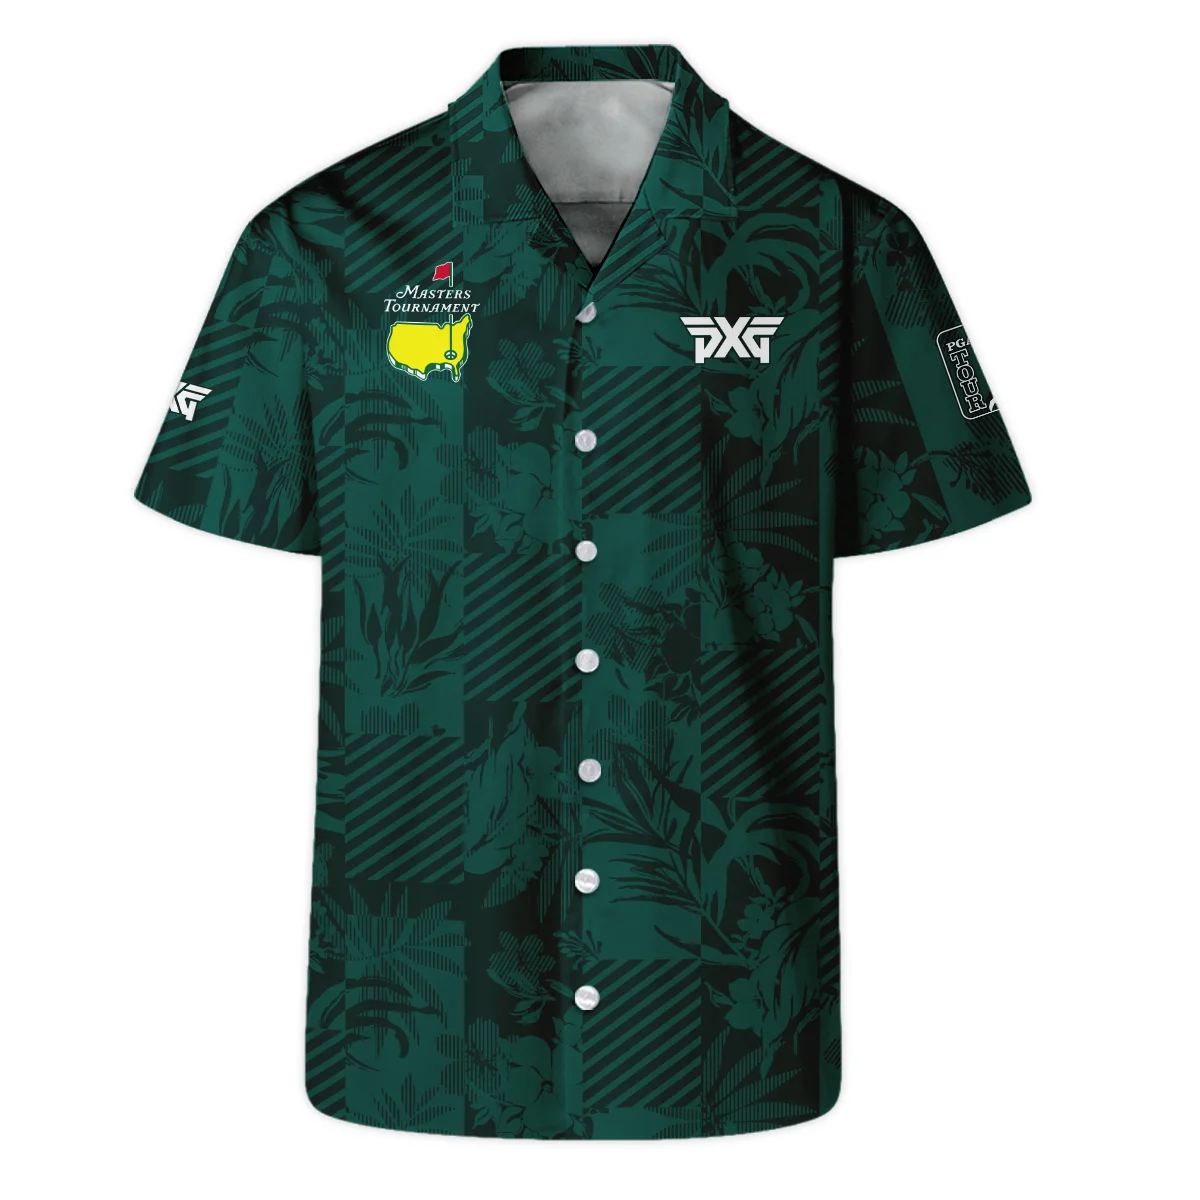 Tropical Leaves ,Foliage With Geometric Stripe Pattern Golf Masters Tournament Long Polo Shirt Style Classic Long Polo Shirt For Men